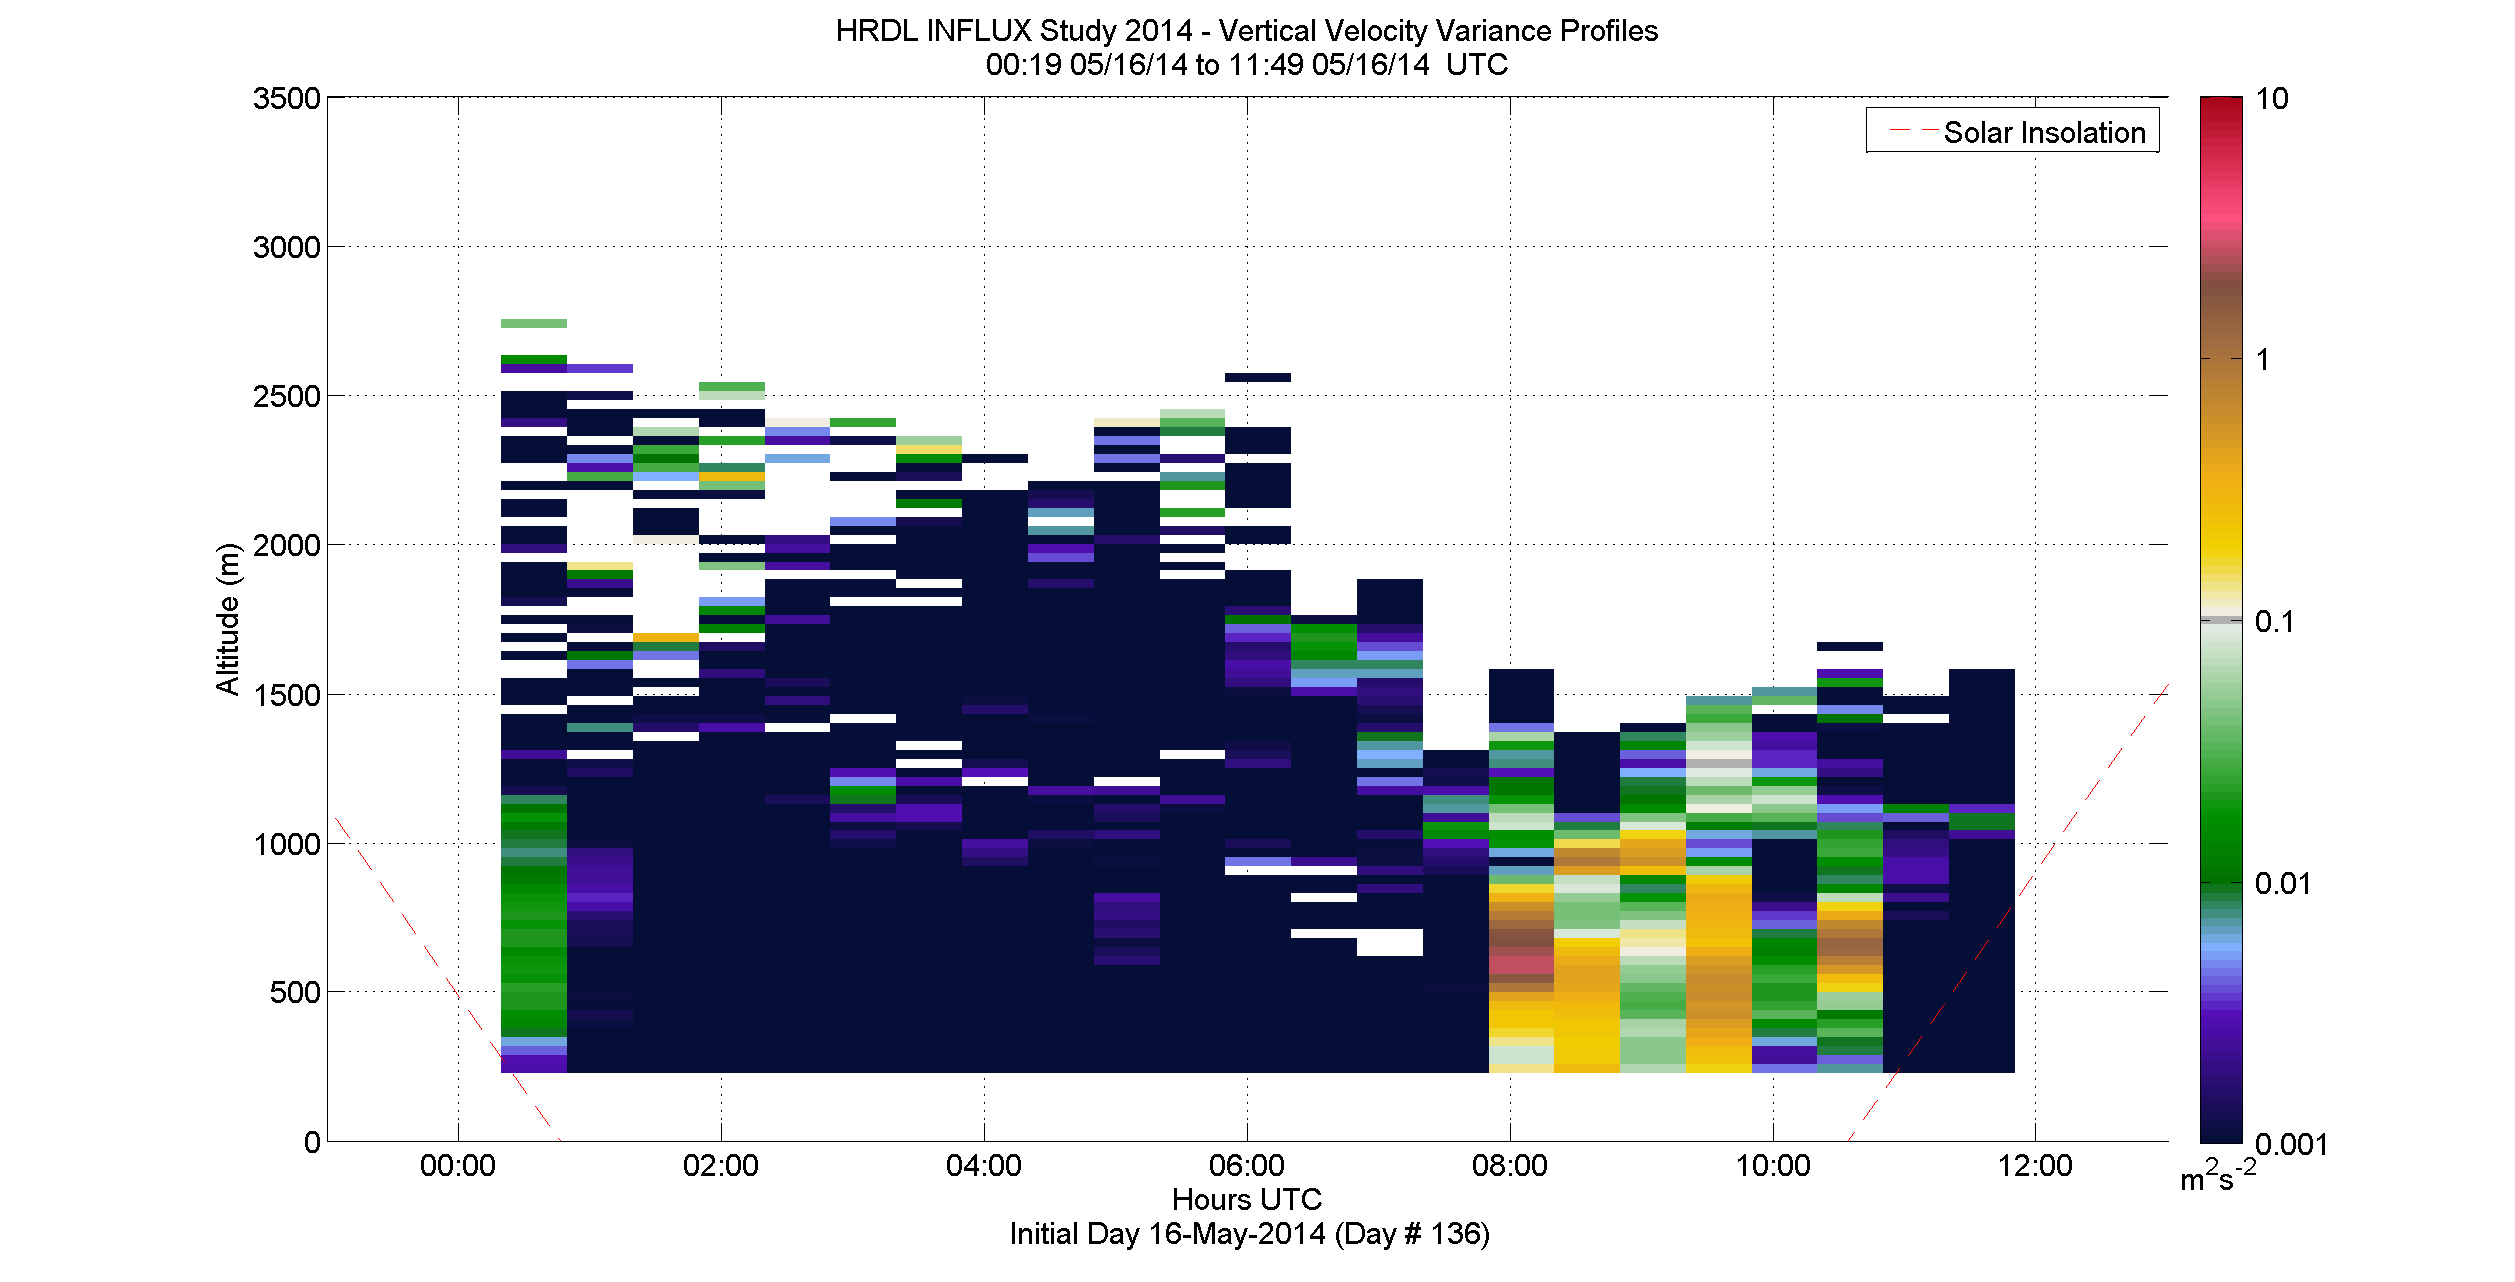 HRDL vertical velocity variance profile - May 16 am